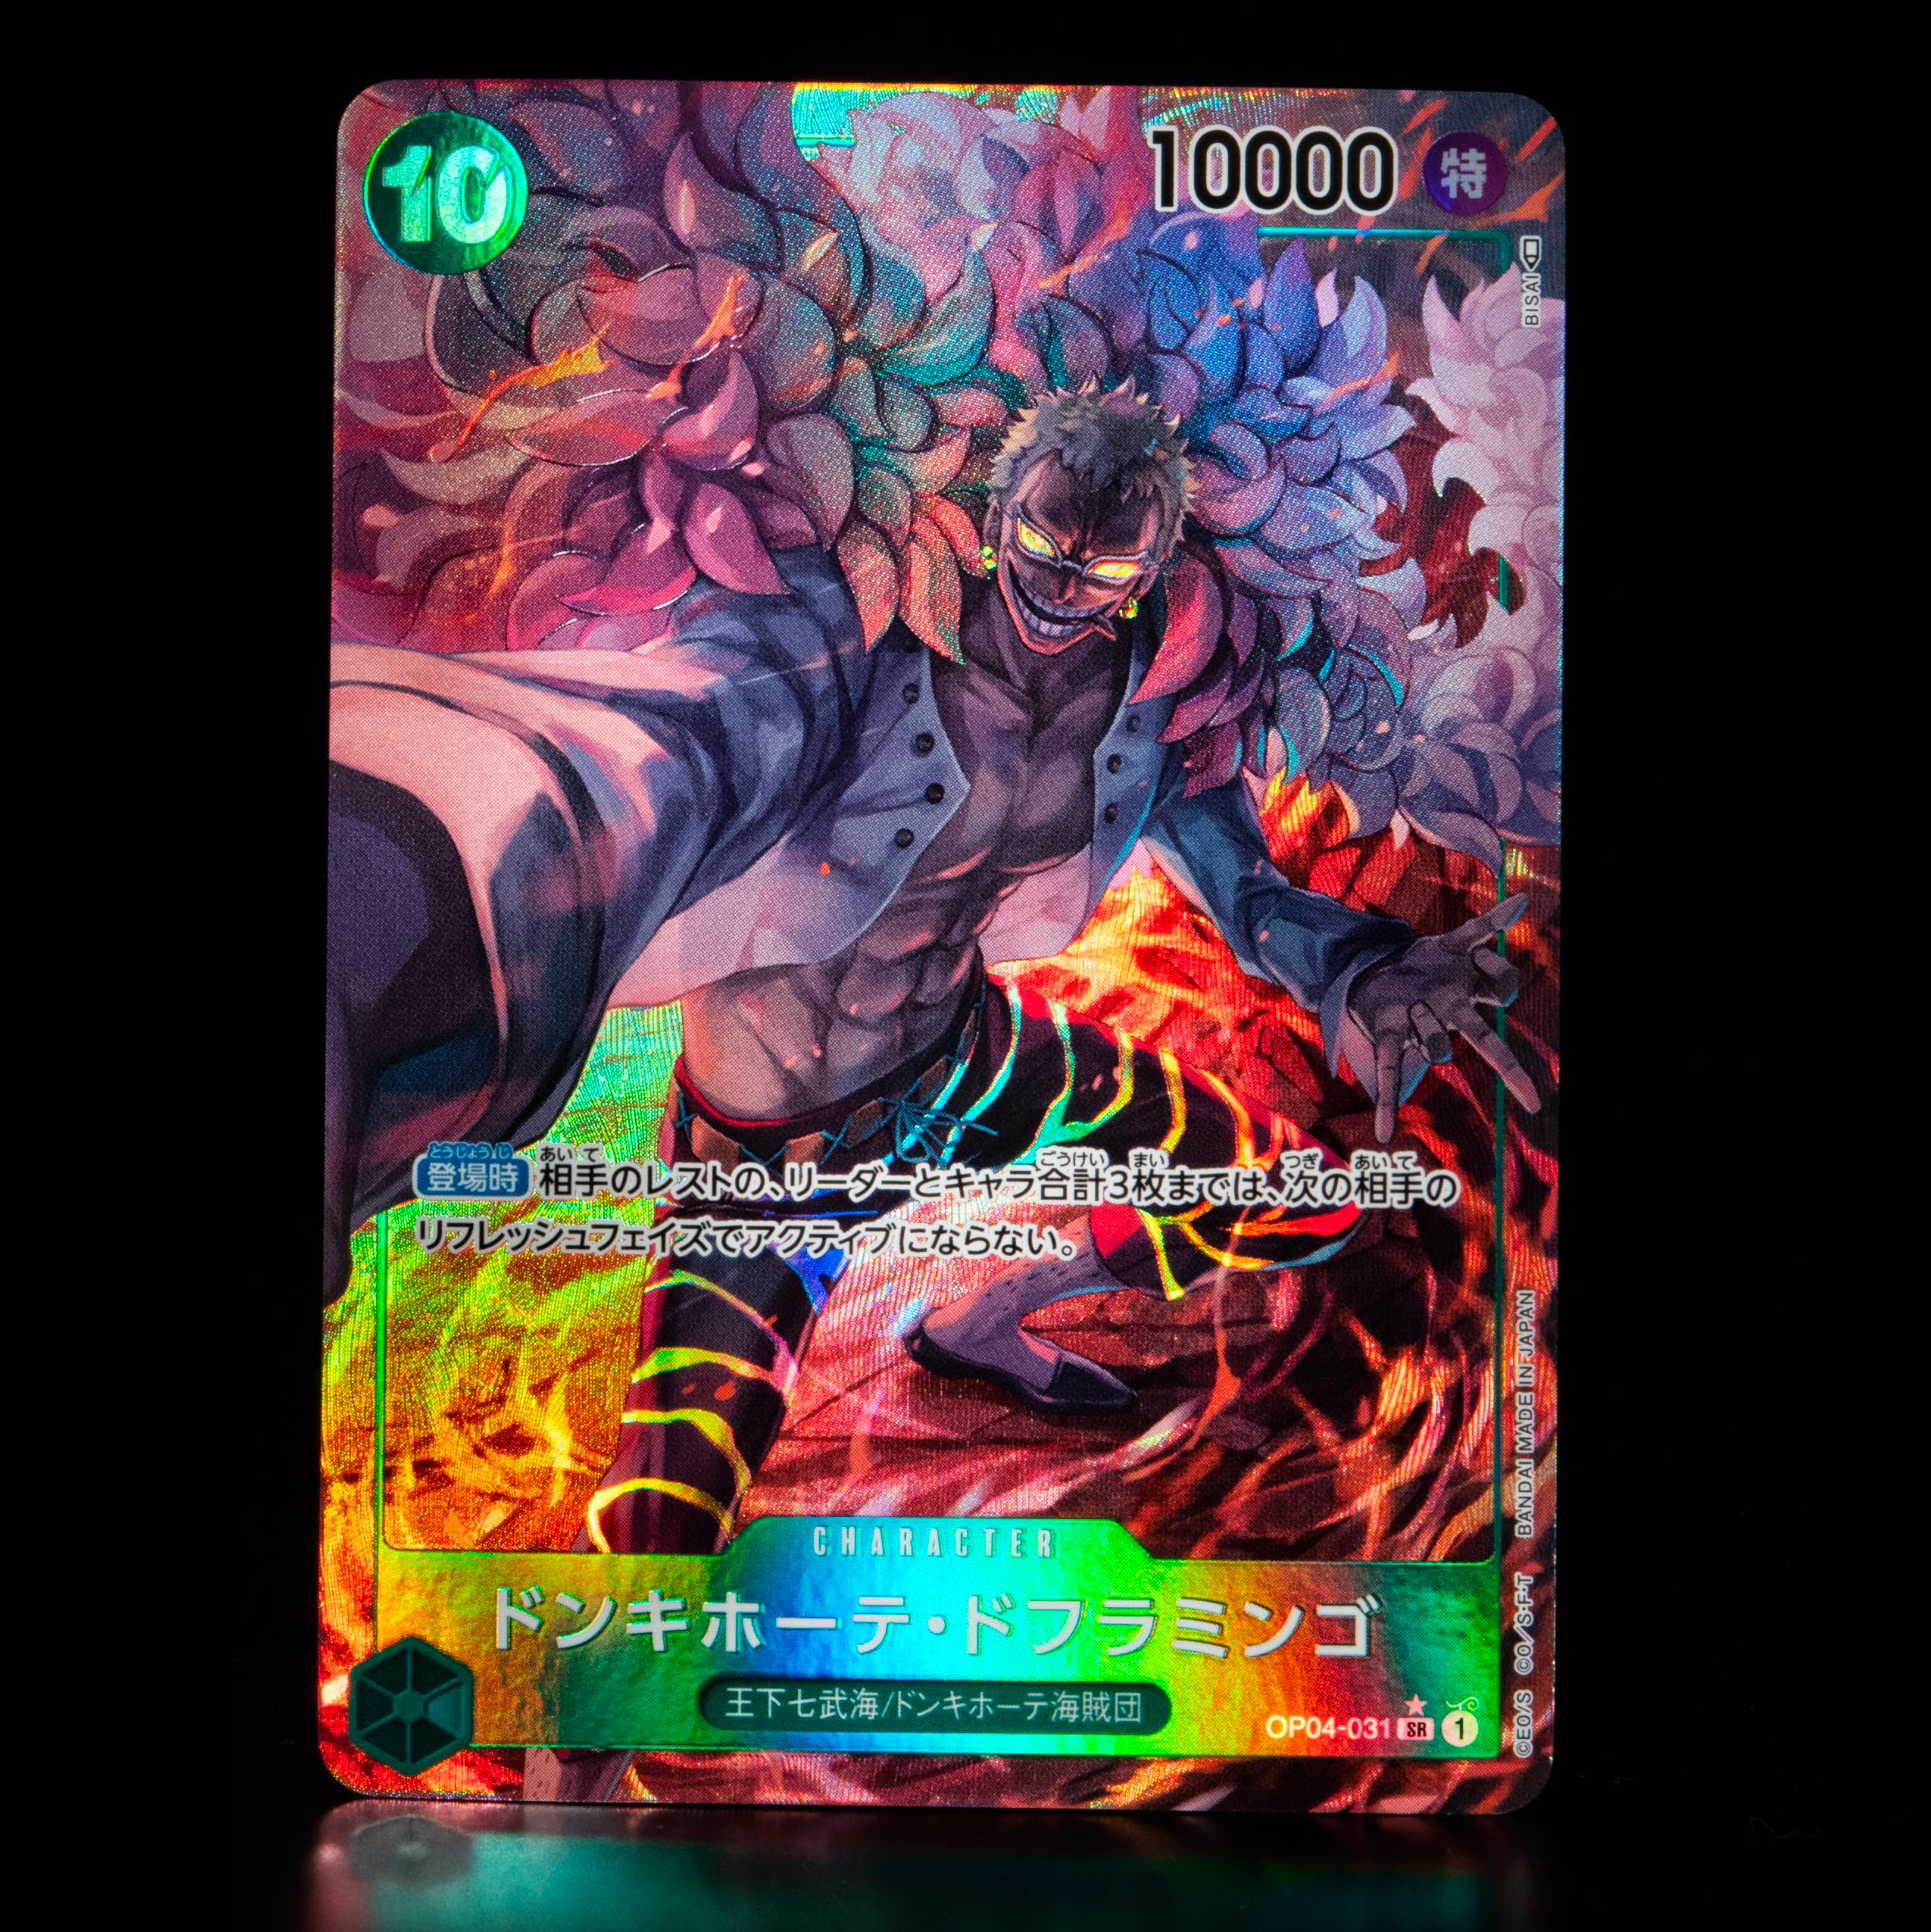 ONE PIECE CARD GAME ｢Kingdoms of Intrigue｣  ONE PIECE CARD GAME OP04-031 Super Rare Parallel card  Donquixote Doflamingo